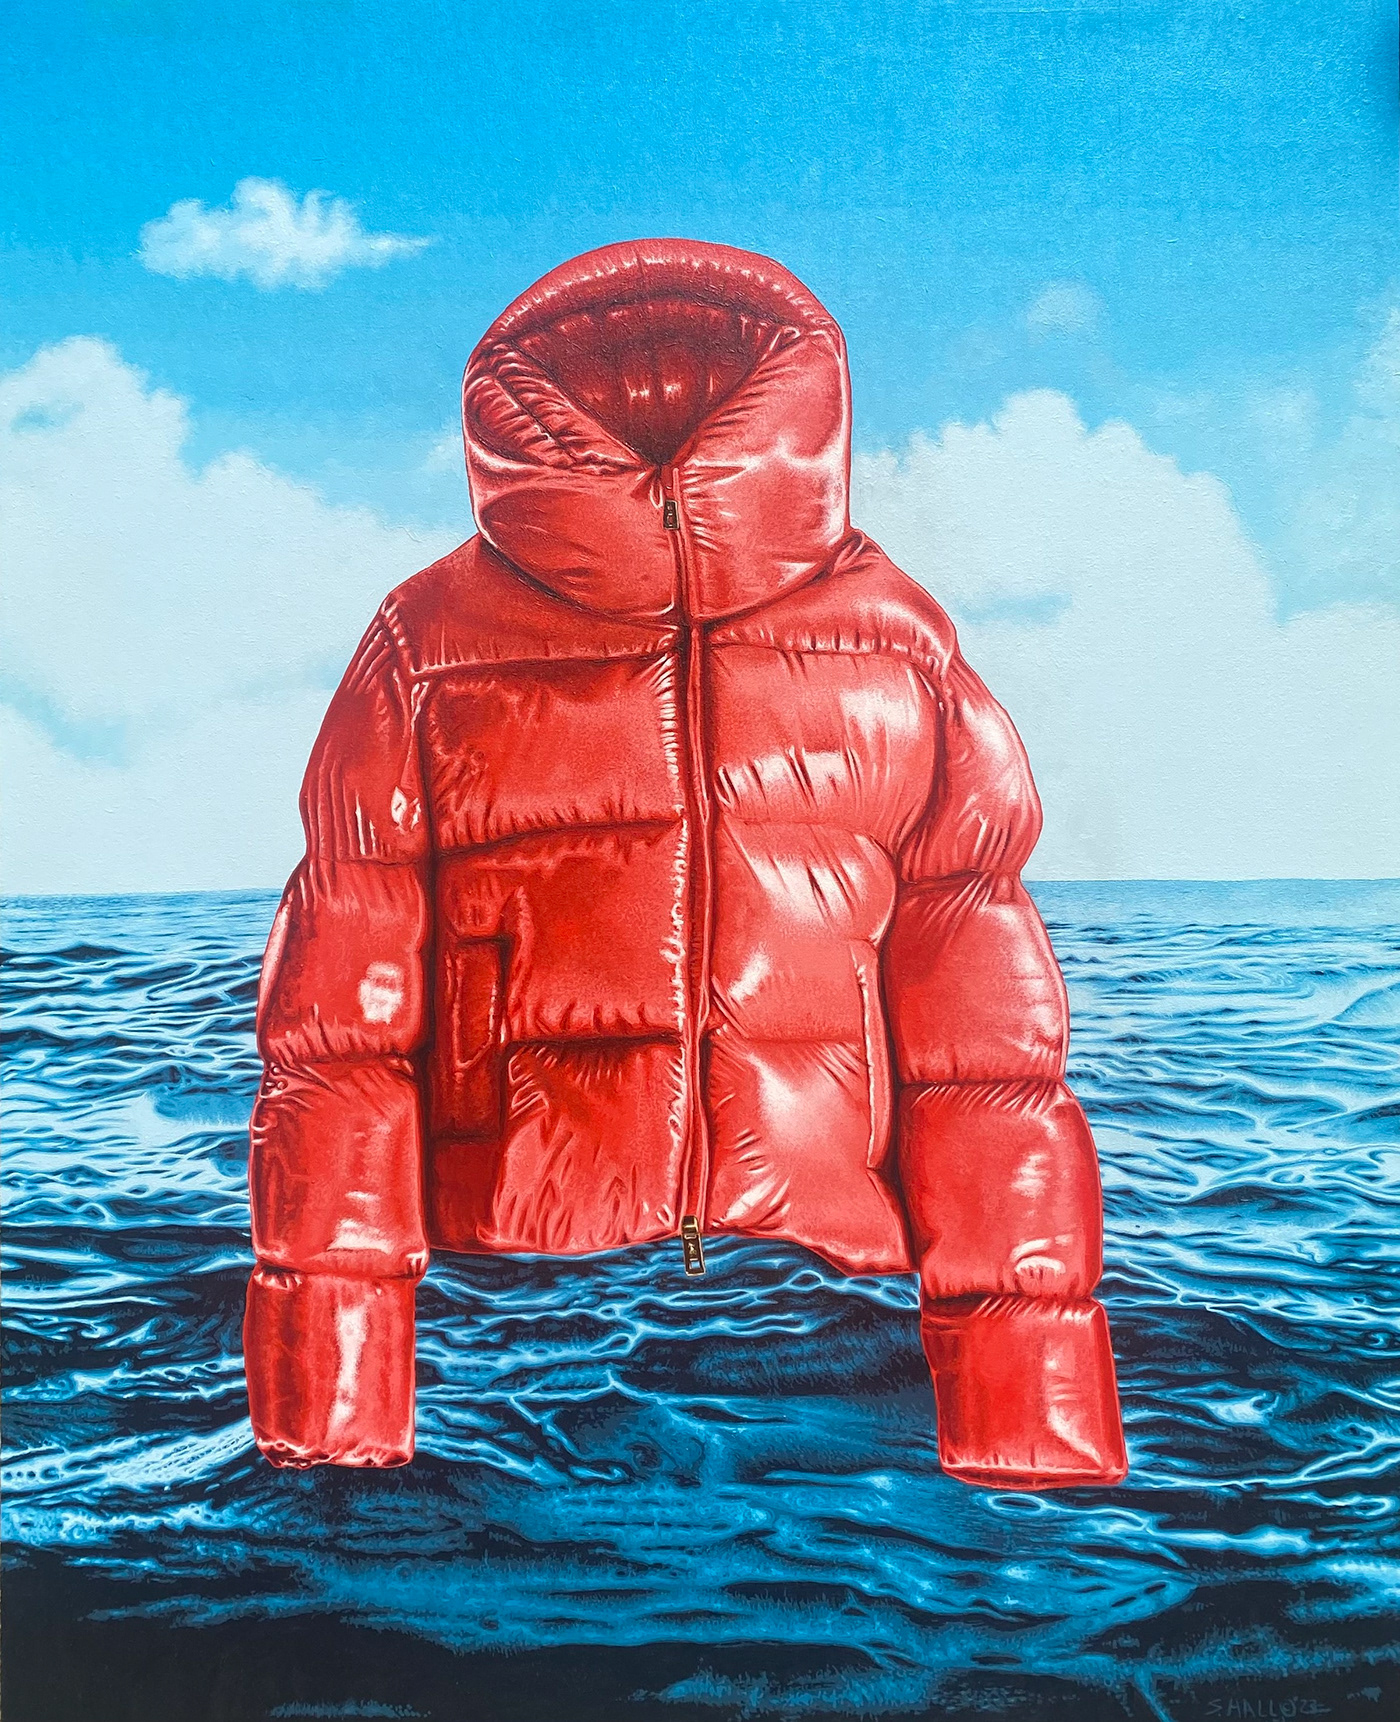 greed save the oceans save the planet brand identity designer red jacket green world mass consumerism